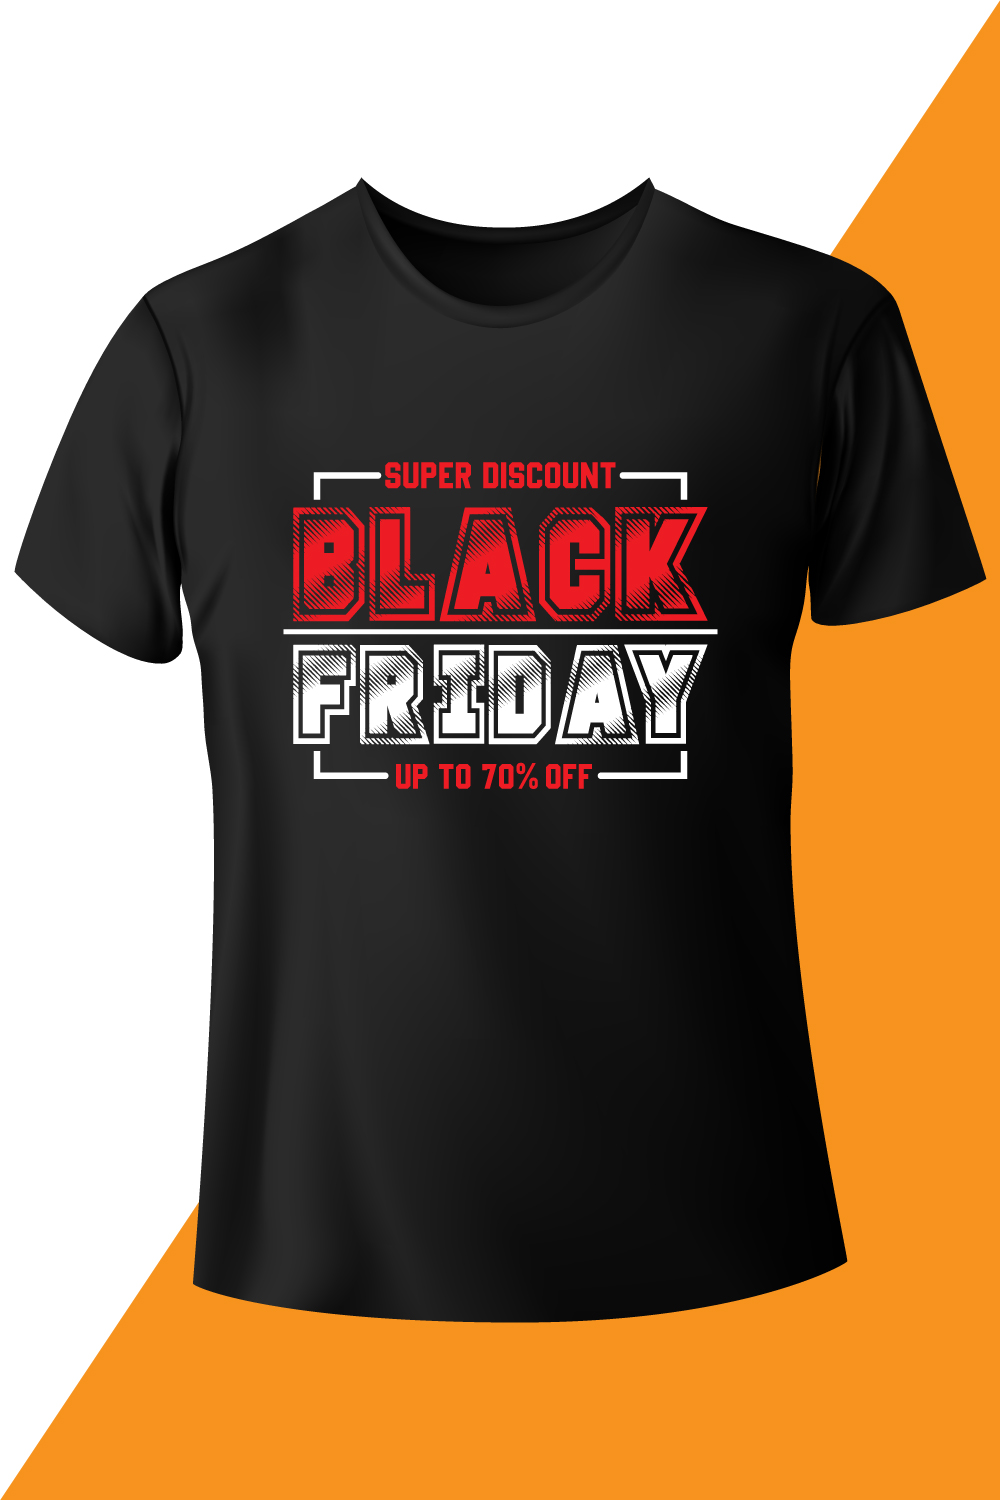 The image of a black t-shirt with an irresistible inscription Black Friday.